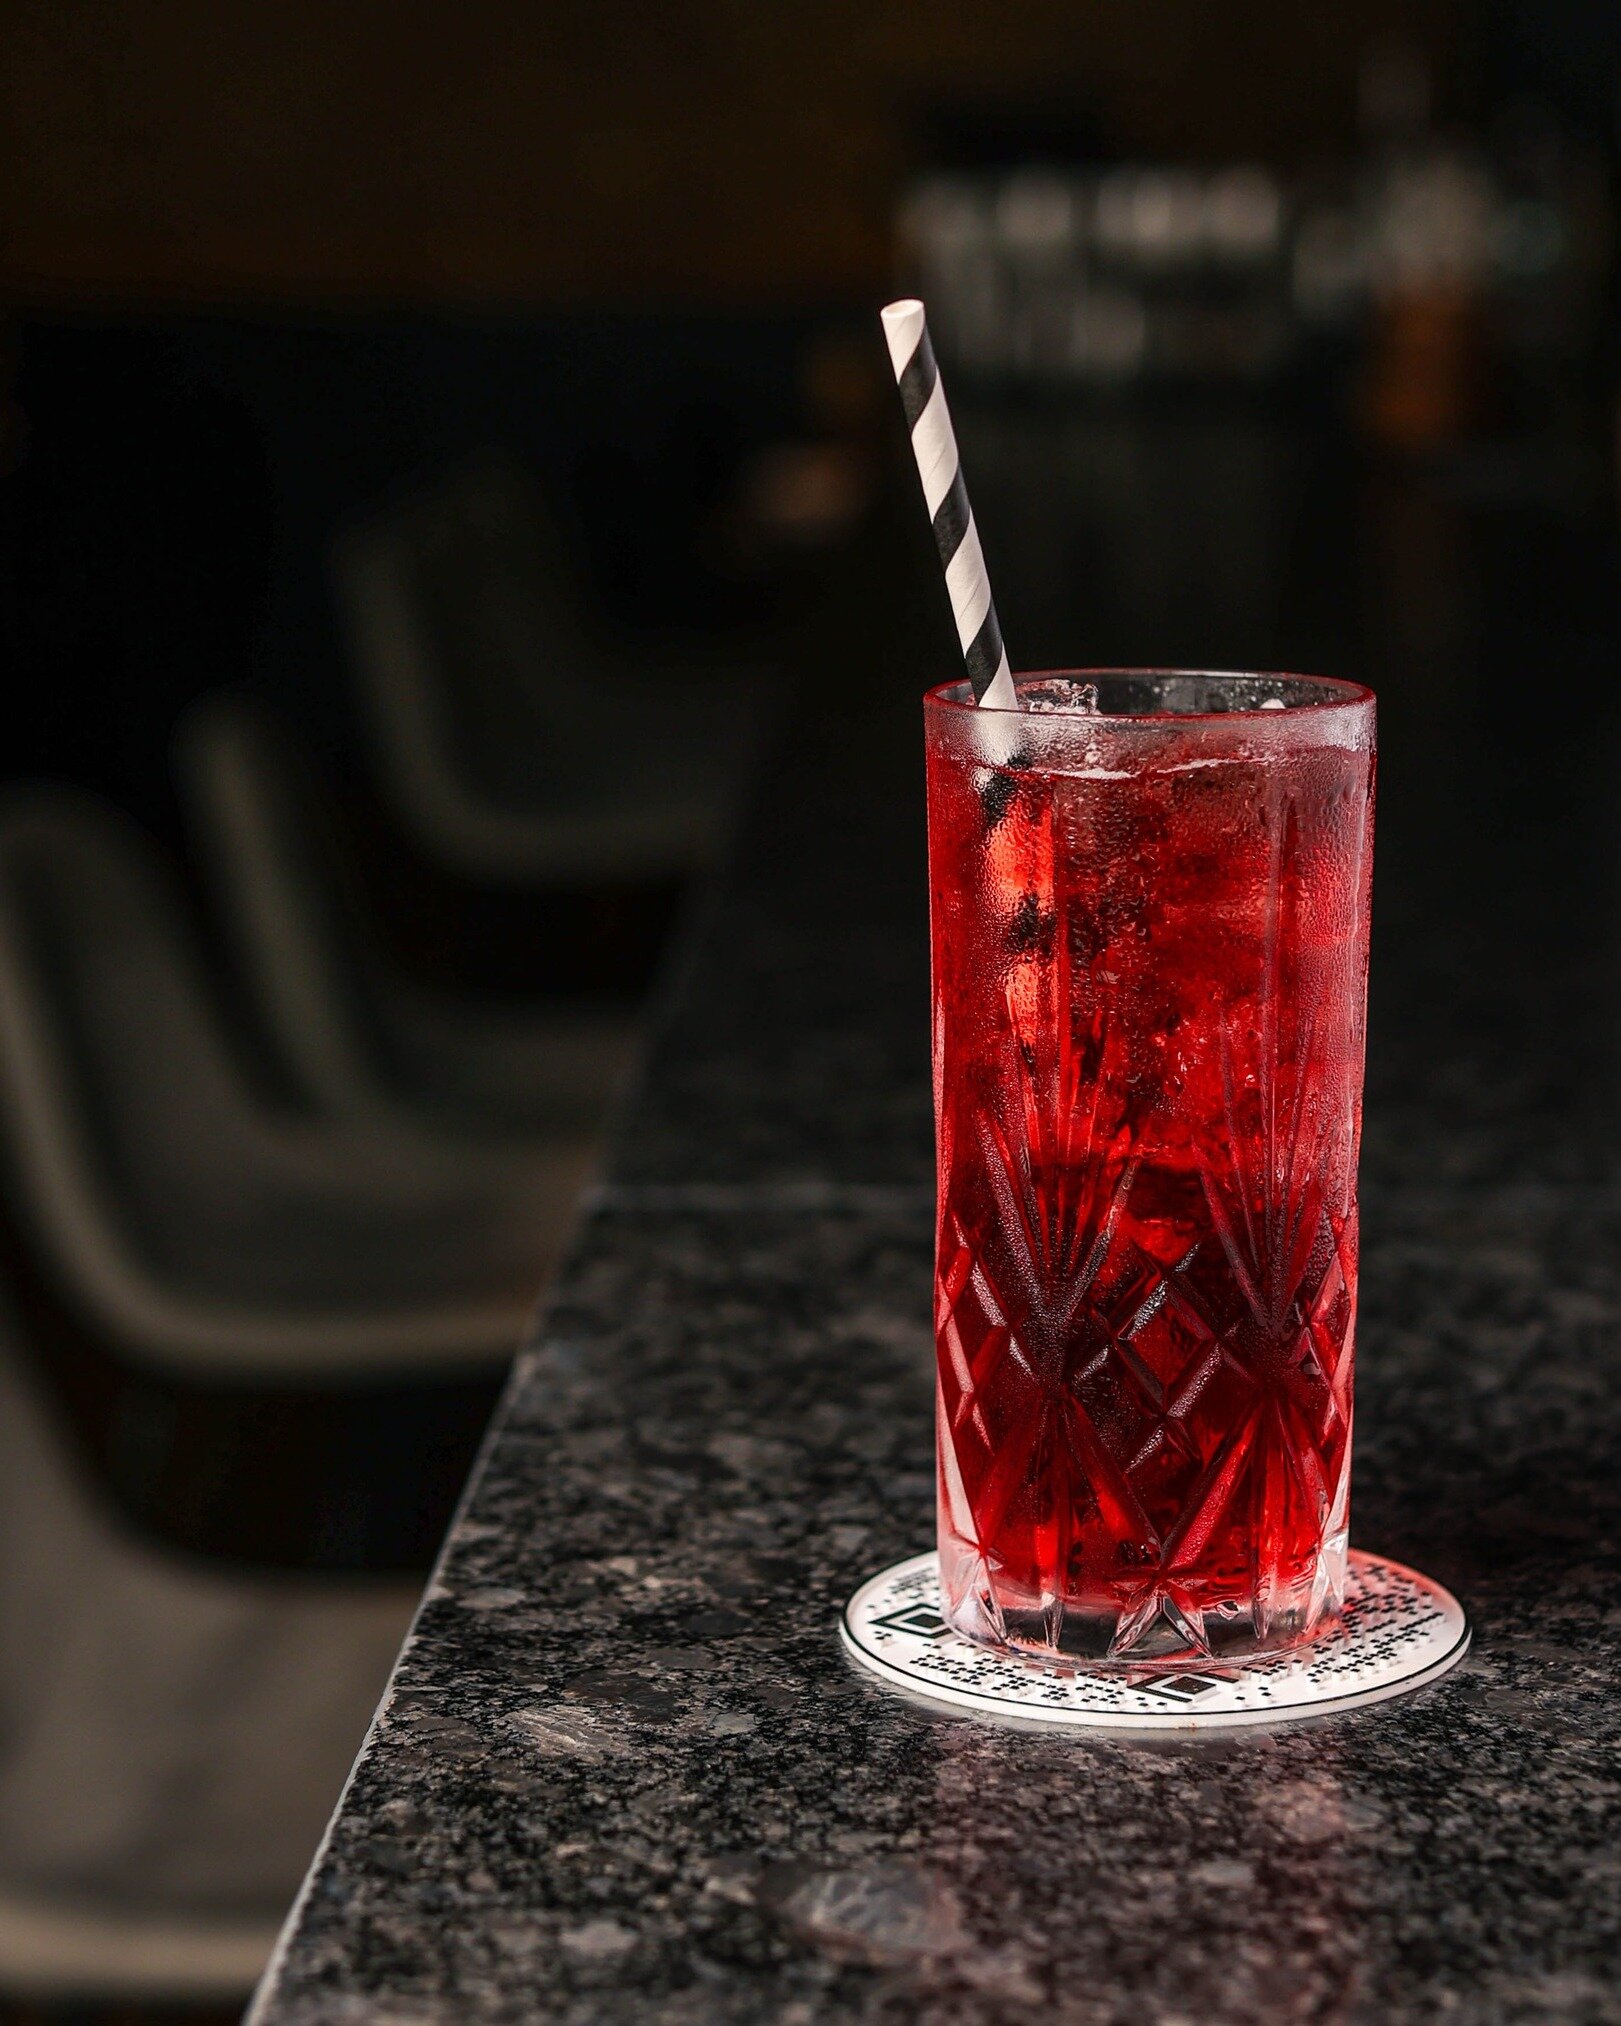 The JJ signature cocktail Bokbunja Highball offers a wonderful combination of smoky whisky that perfectly complements the deep flavors of blackberry wine. This decadent elixir, with its deep crimson hue and natural sweetness, adds a touch of elegance